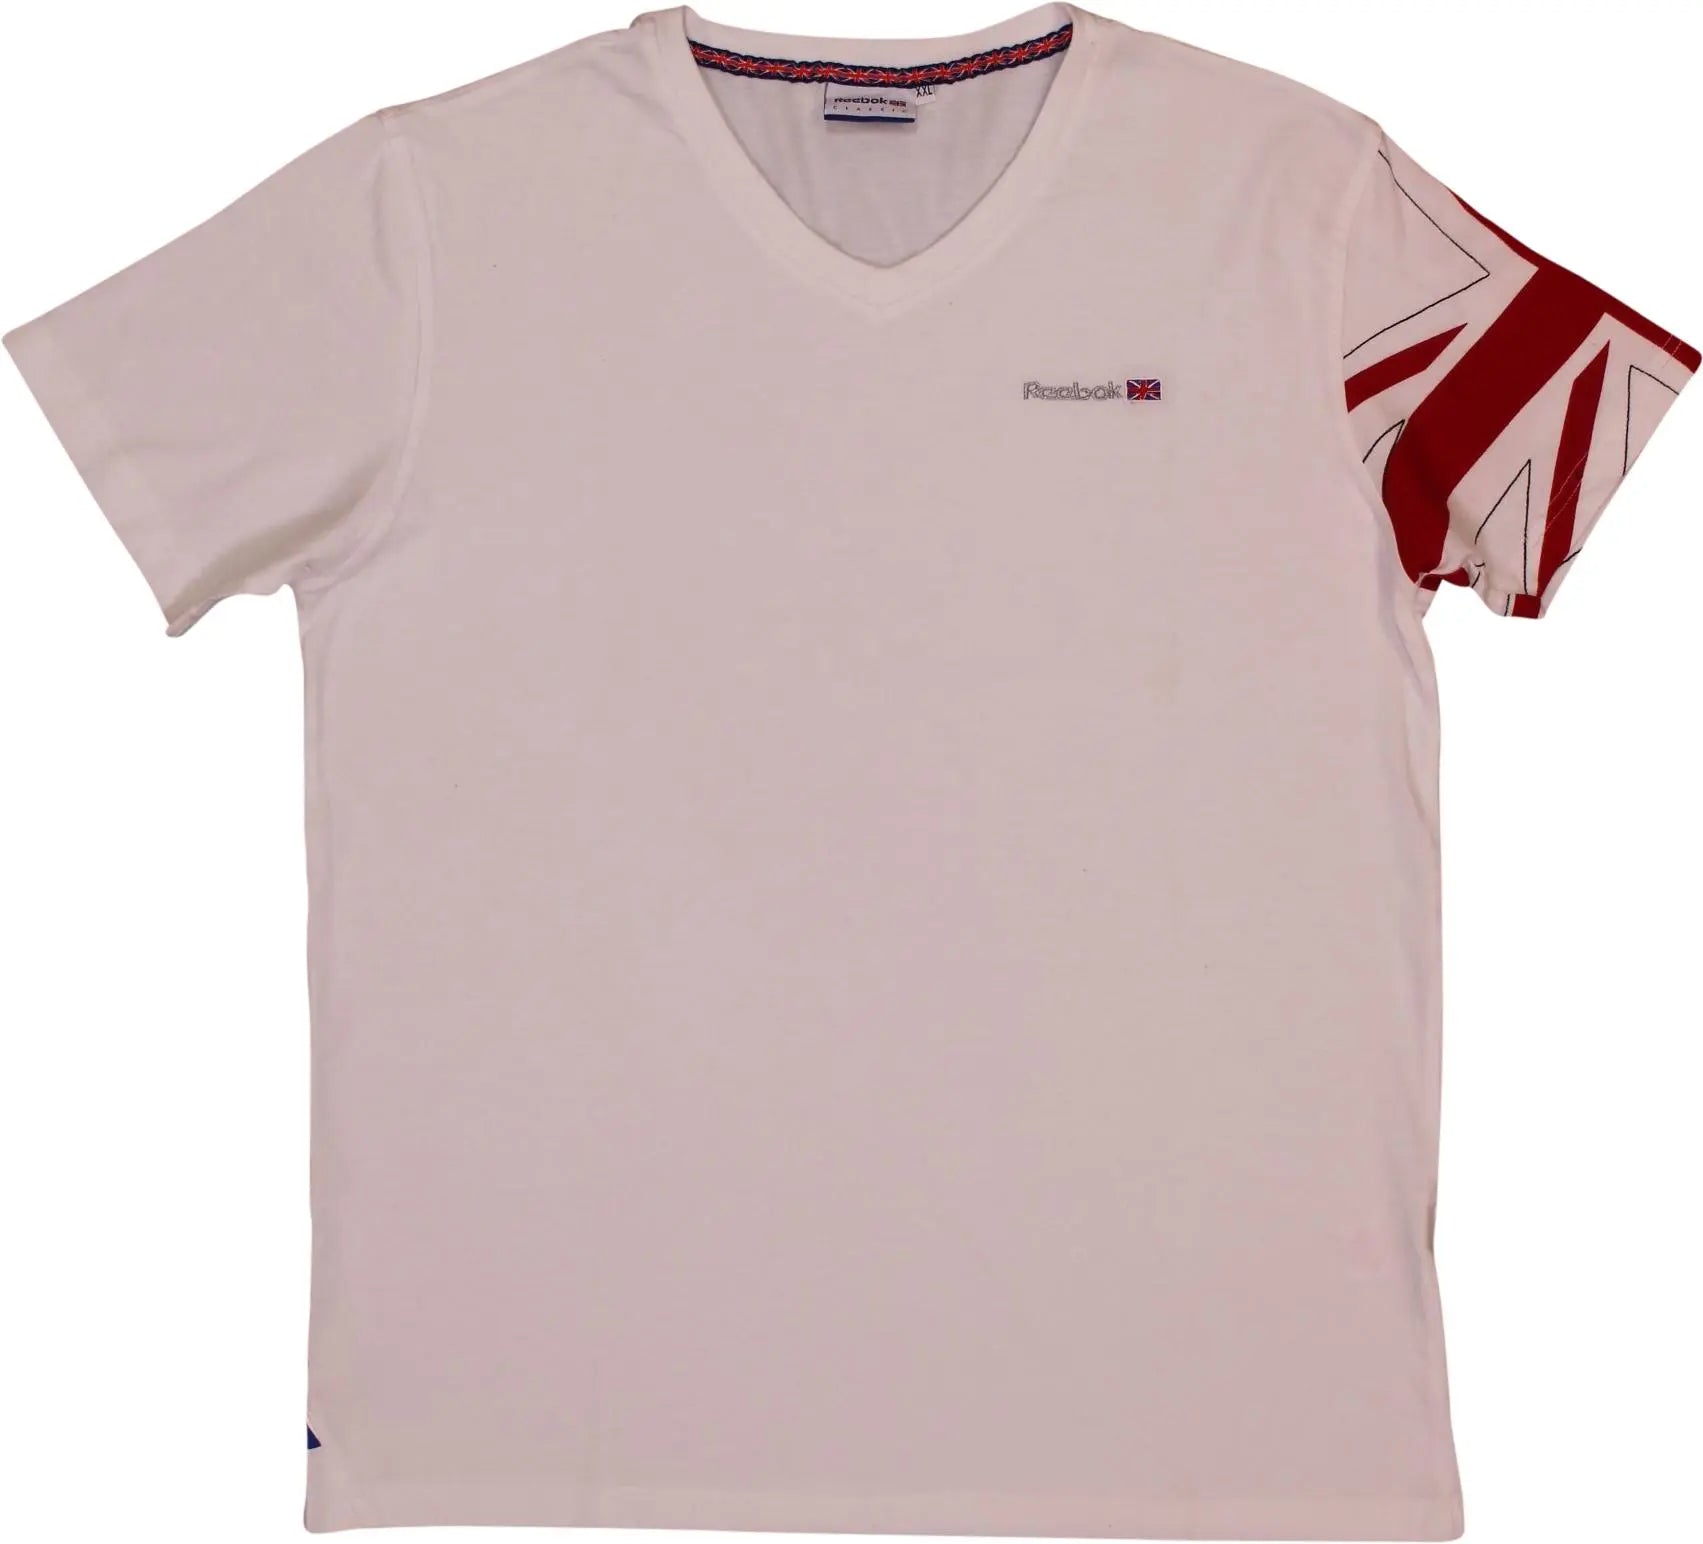 Reebok - White T-shirt by Reebok- ThriftTale.com - Vintage and second handclothing